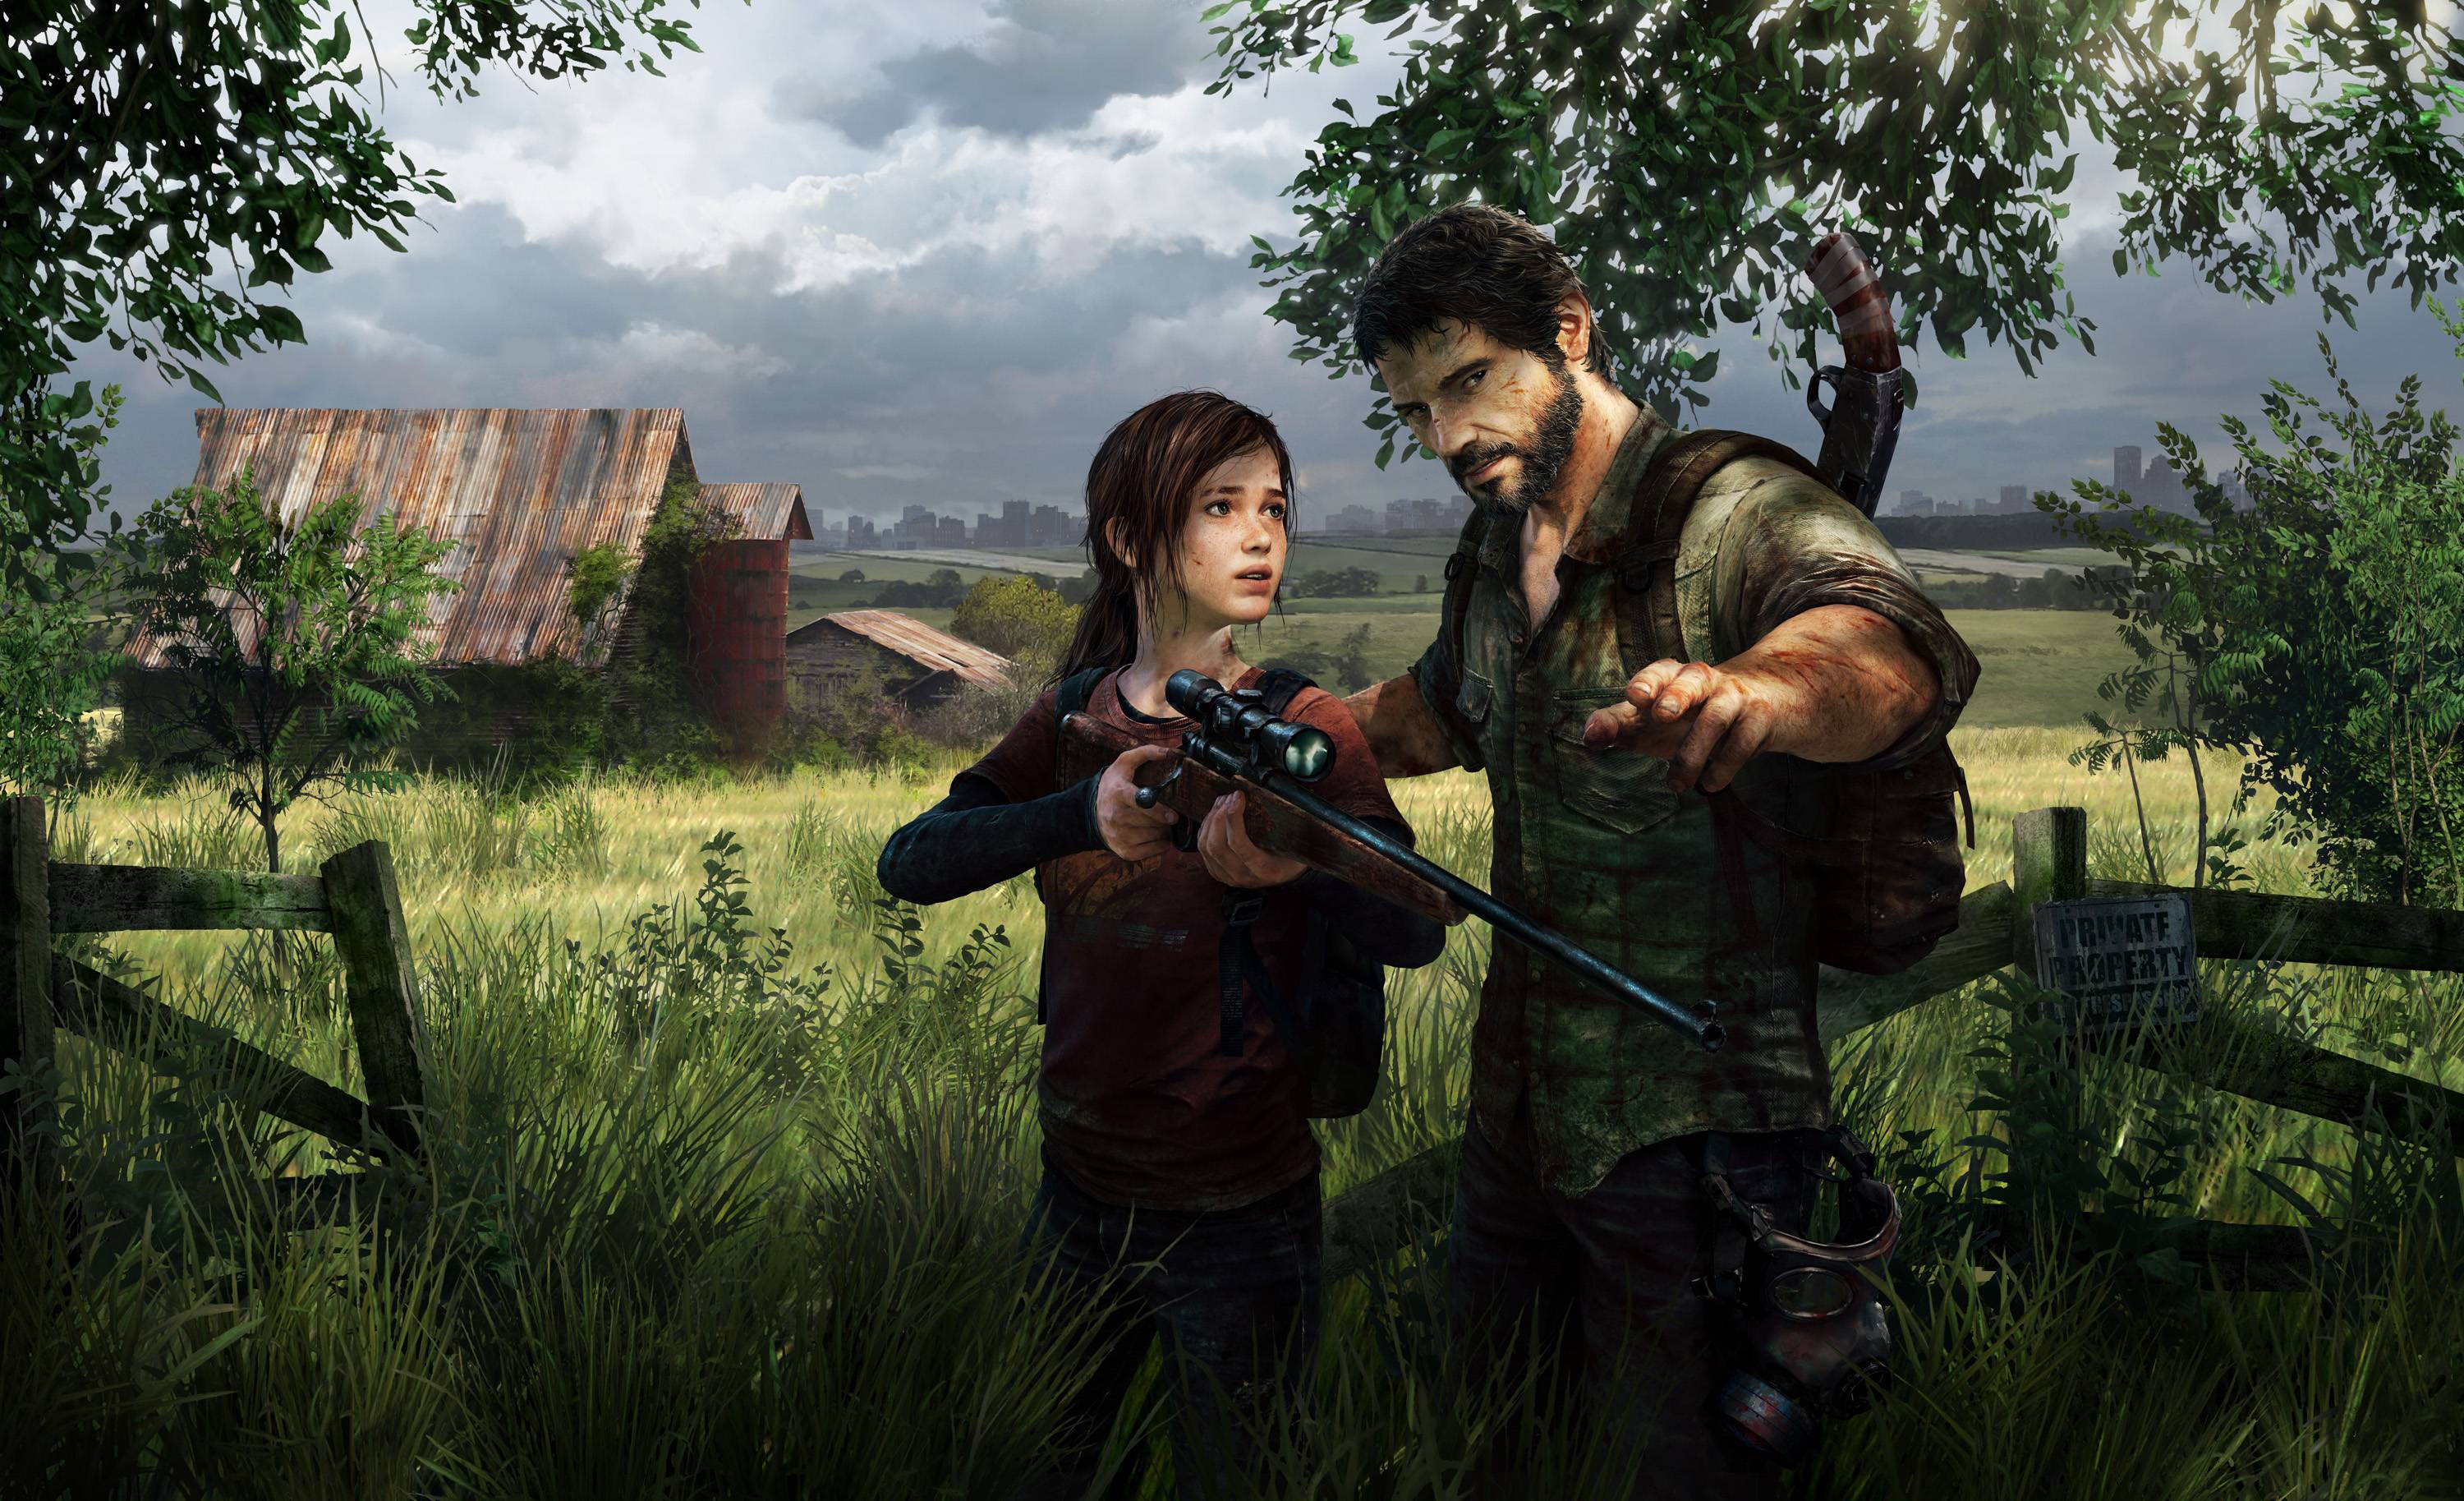 100+] The Last Of Us Mobile Wallpapers